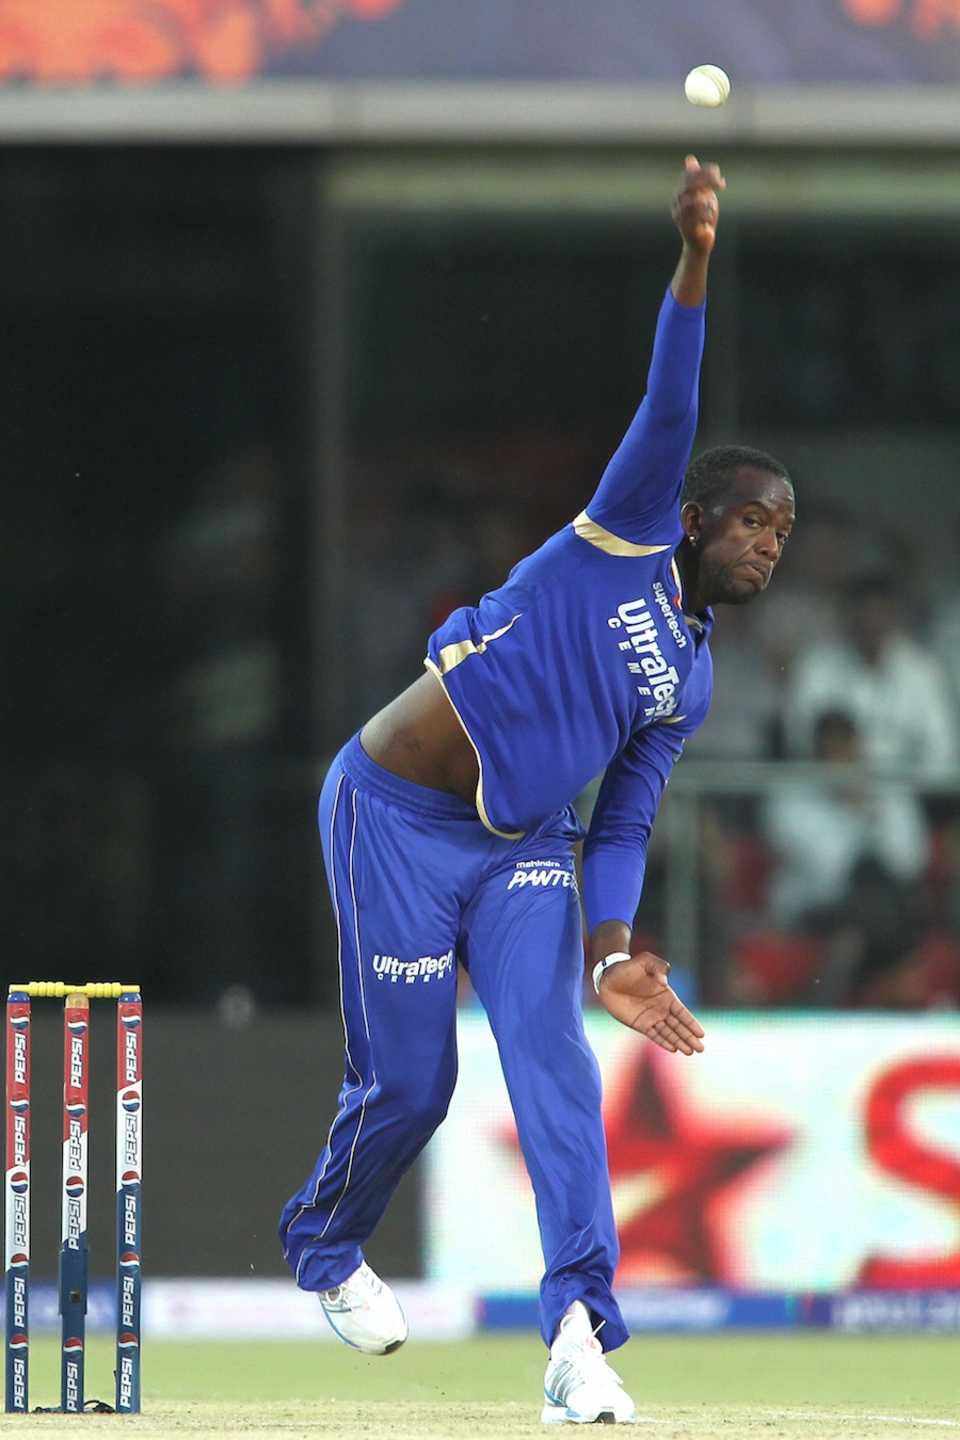 Kevon Cooper took two wickets in the last over